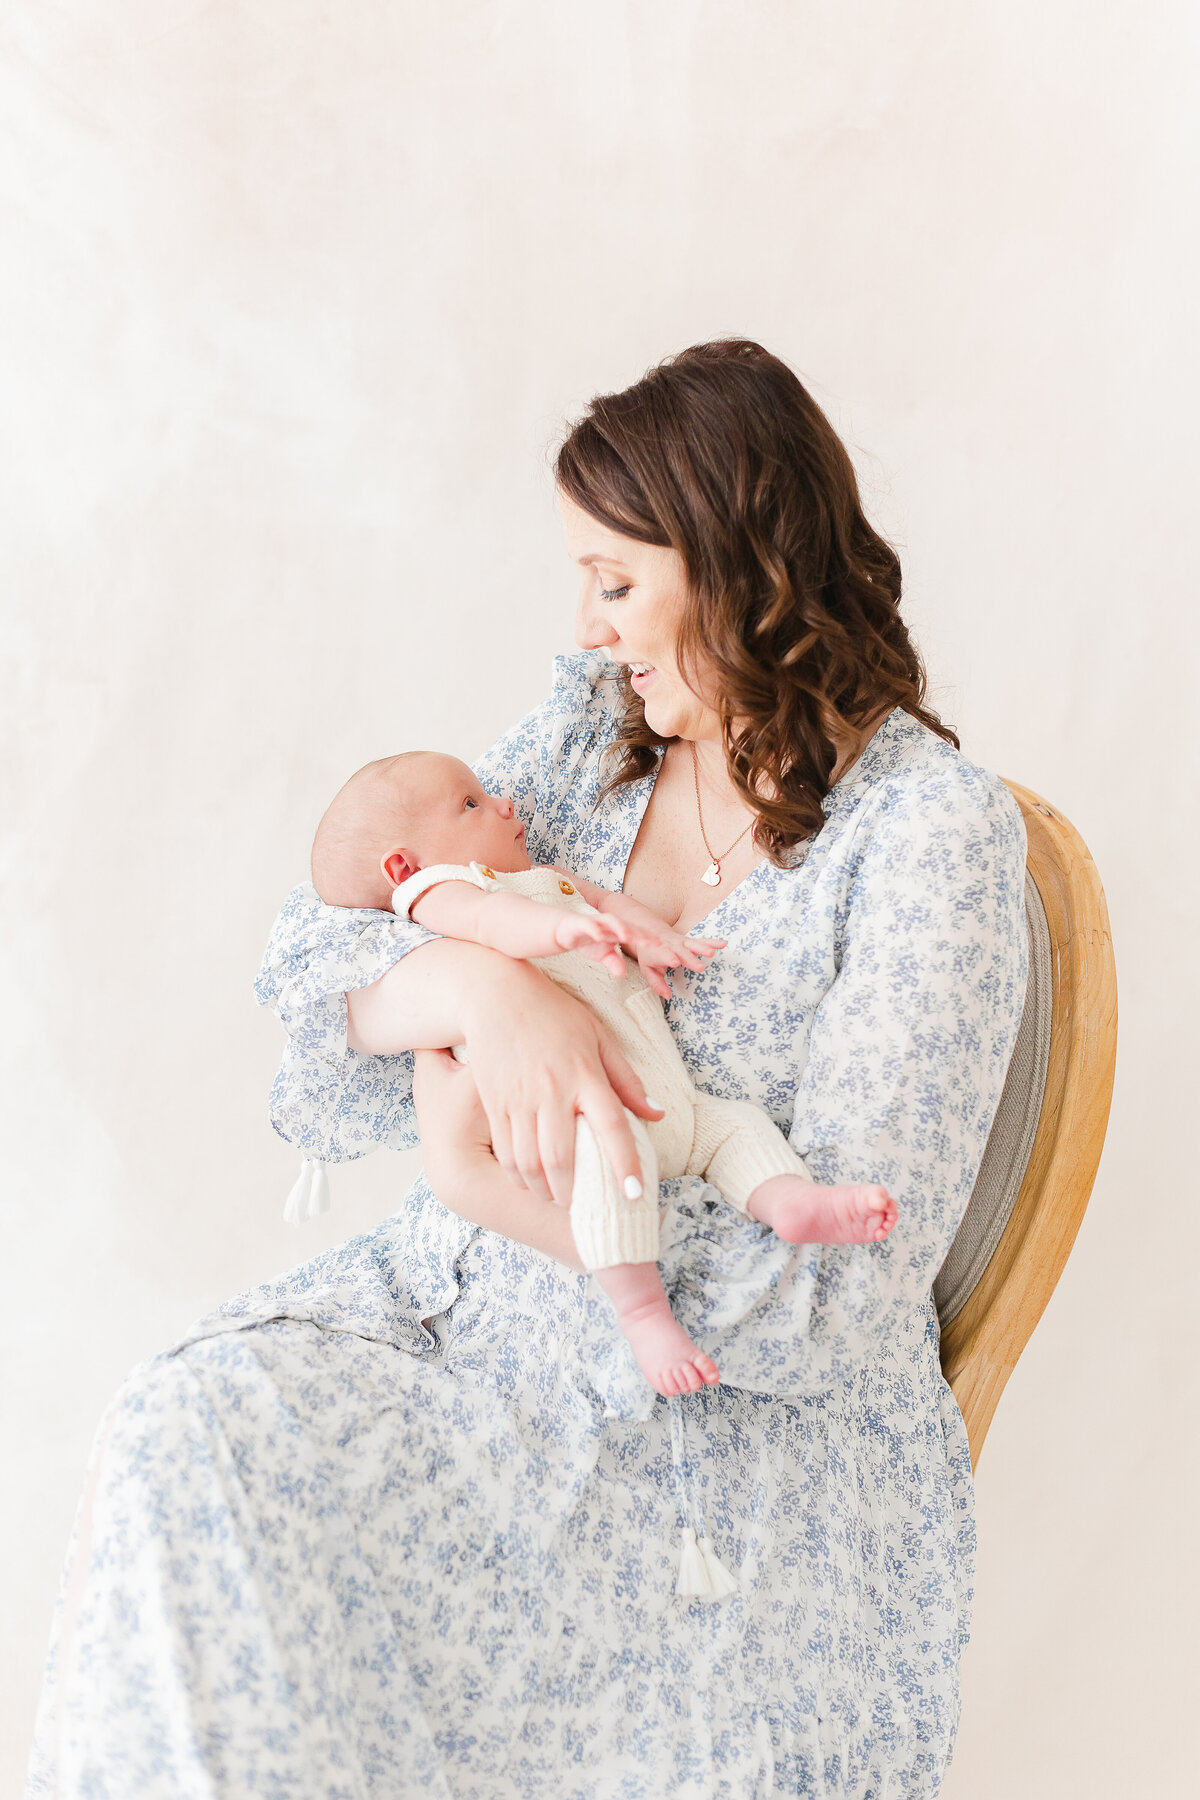 A Nova Studio Photography photo of a mother sitting down in a chair looking down at her infant in her lap